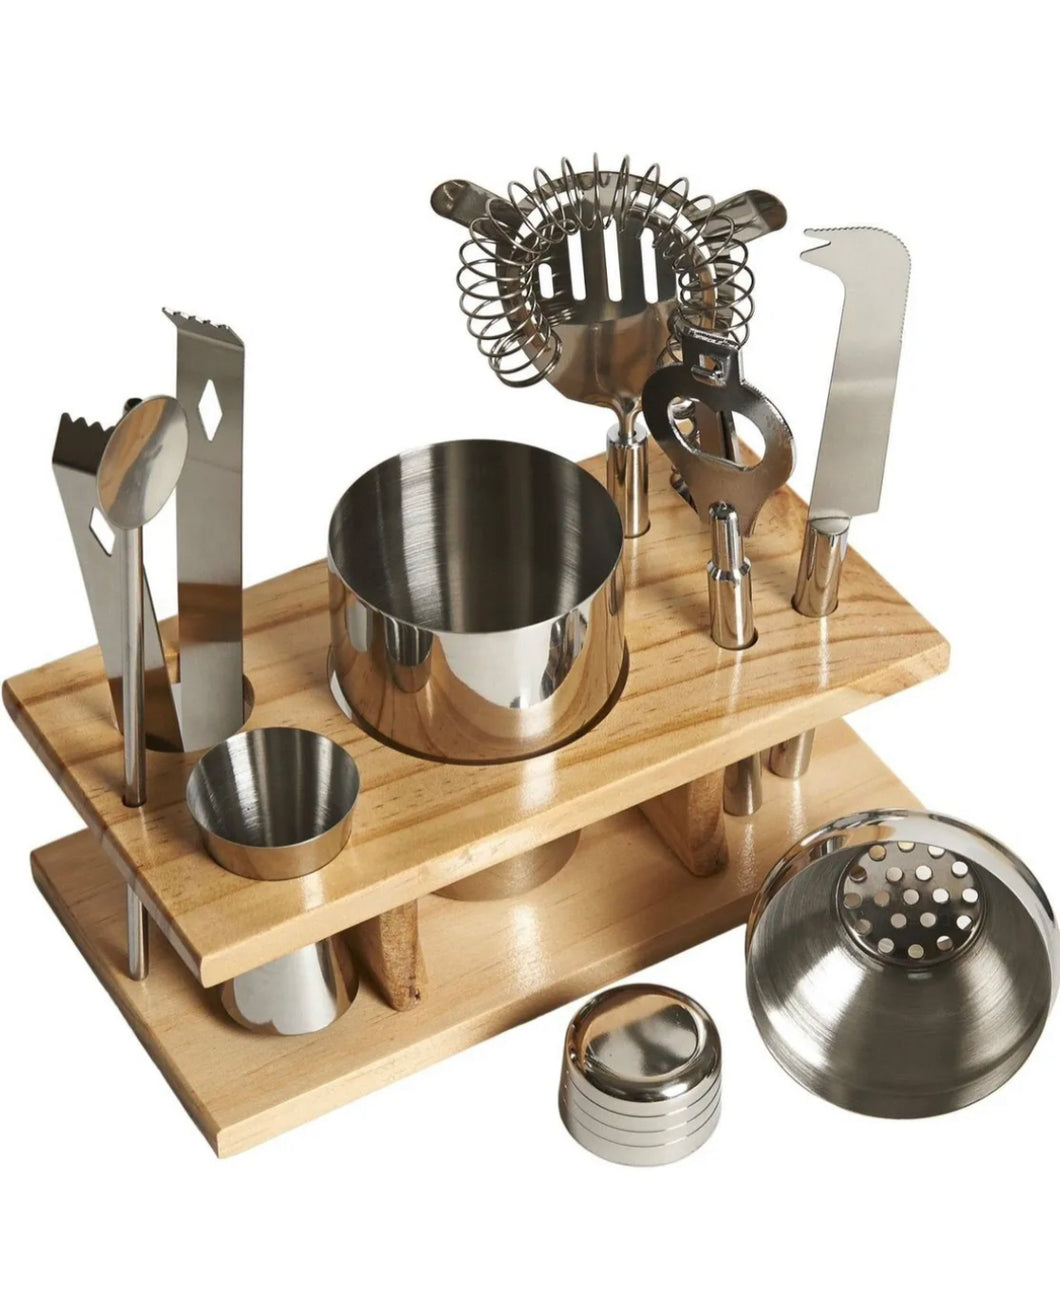 10 Piece Cocktail Maker Stainless Steel Bar Set with Wooden Display Stand+Recipe